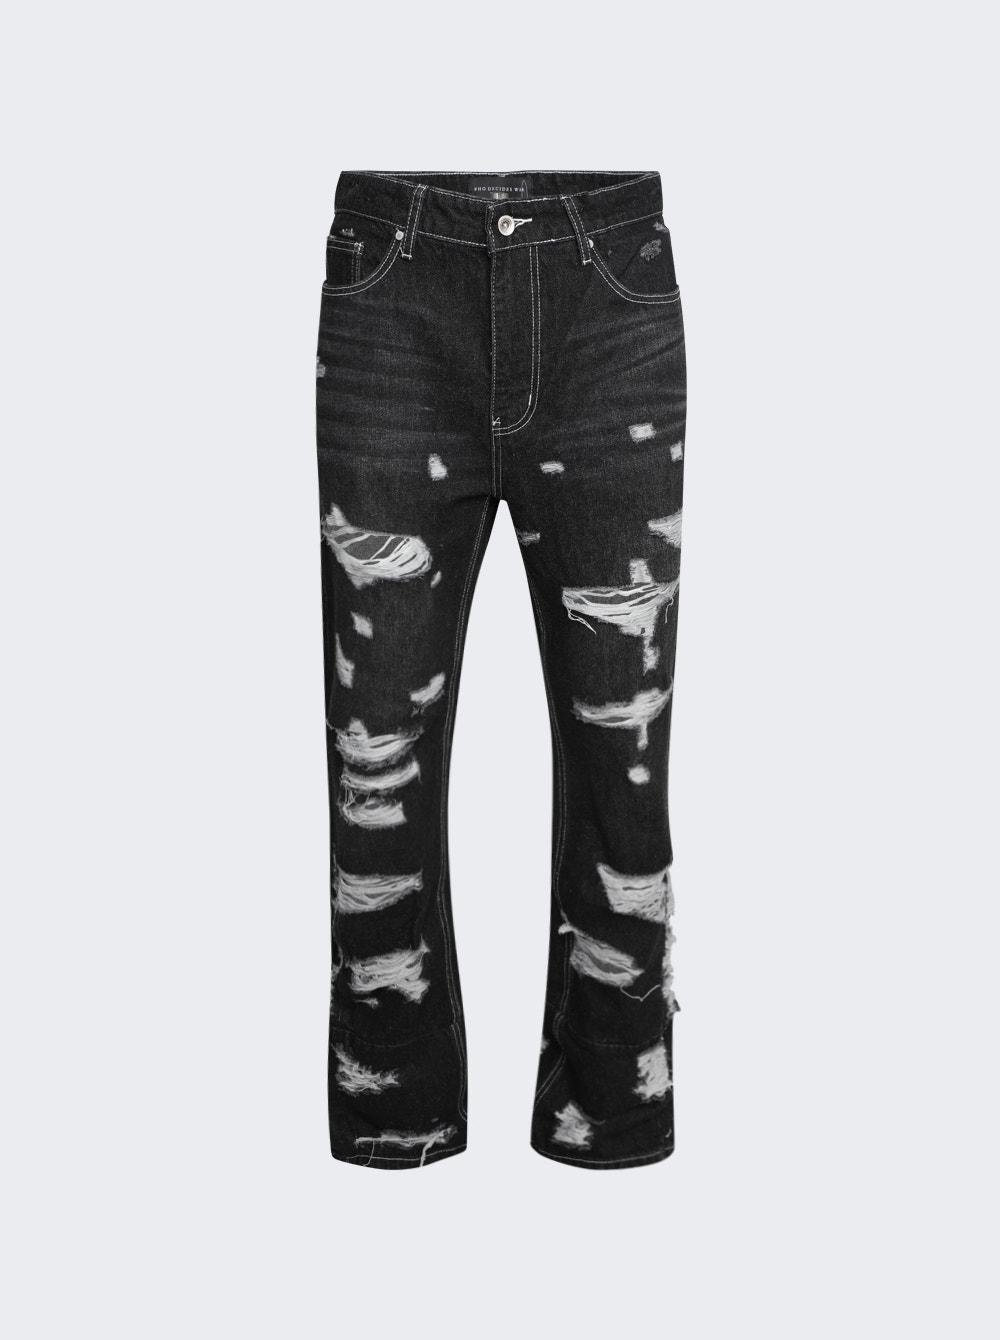 Gnarly Denim Coal  | The Webster by WHO DECIDES WAR